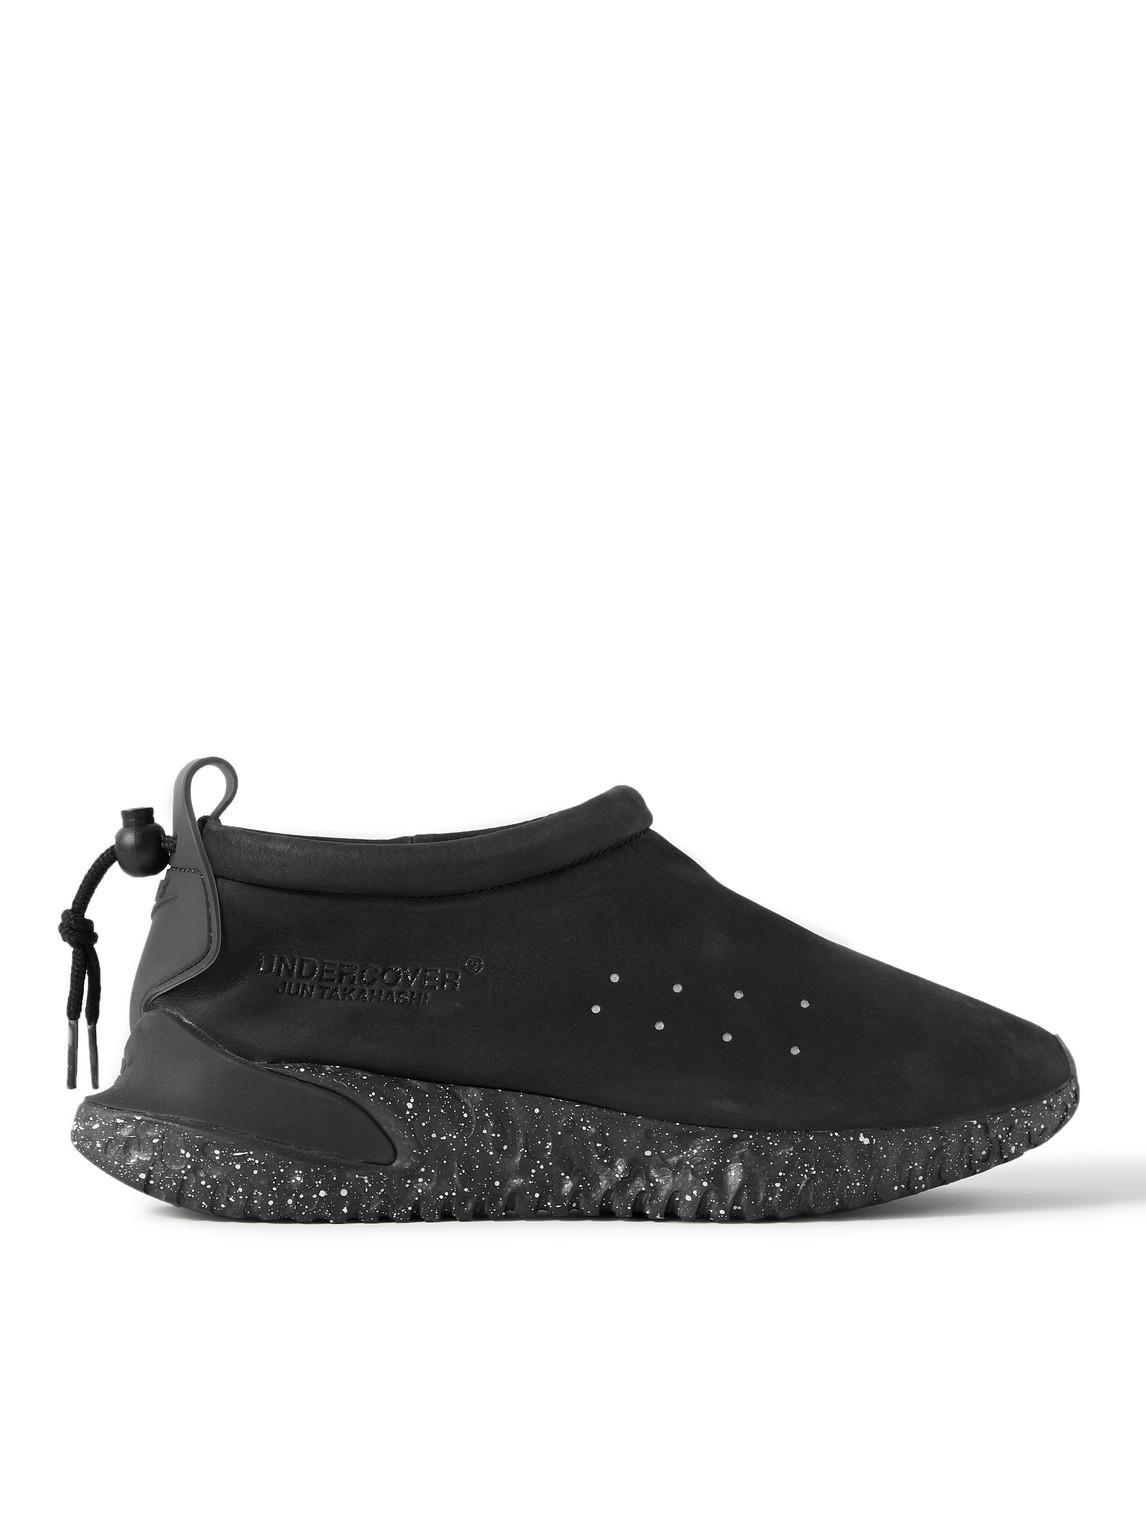 Nike Undercover Moc Flow Sp Rubber-trimmed Suede Slip-on Sneakers in ...